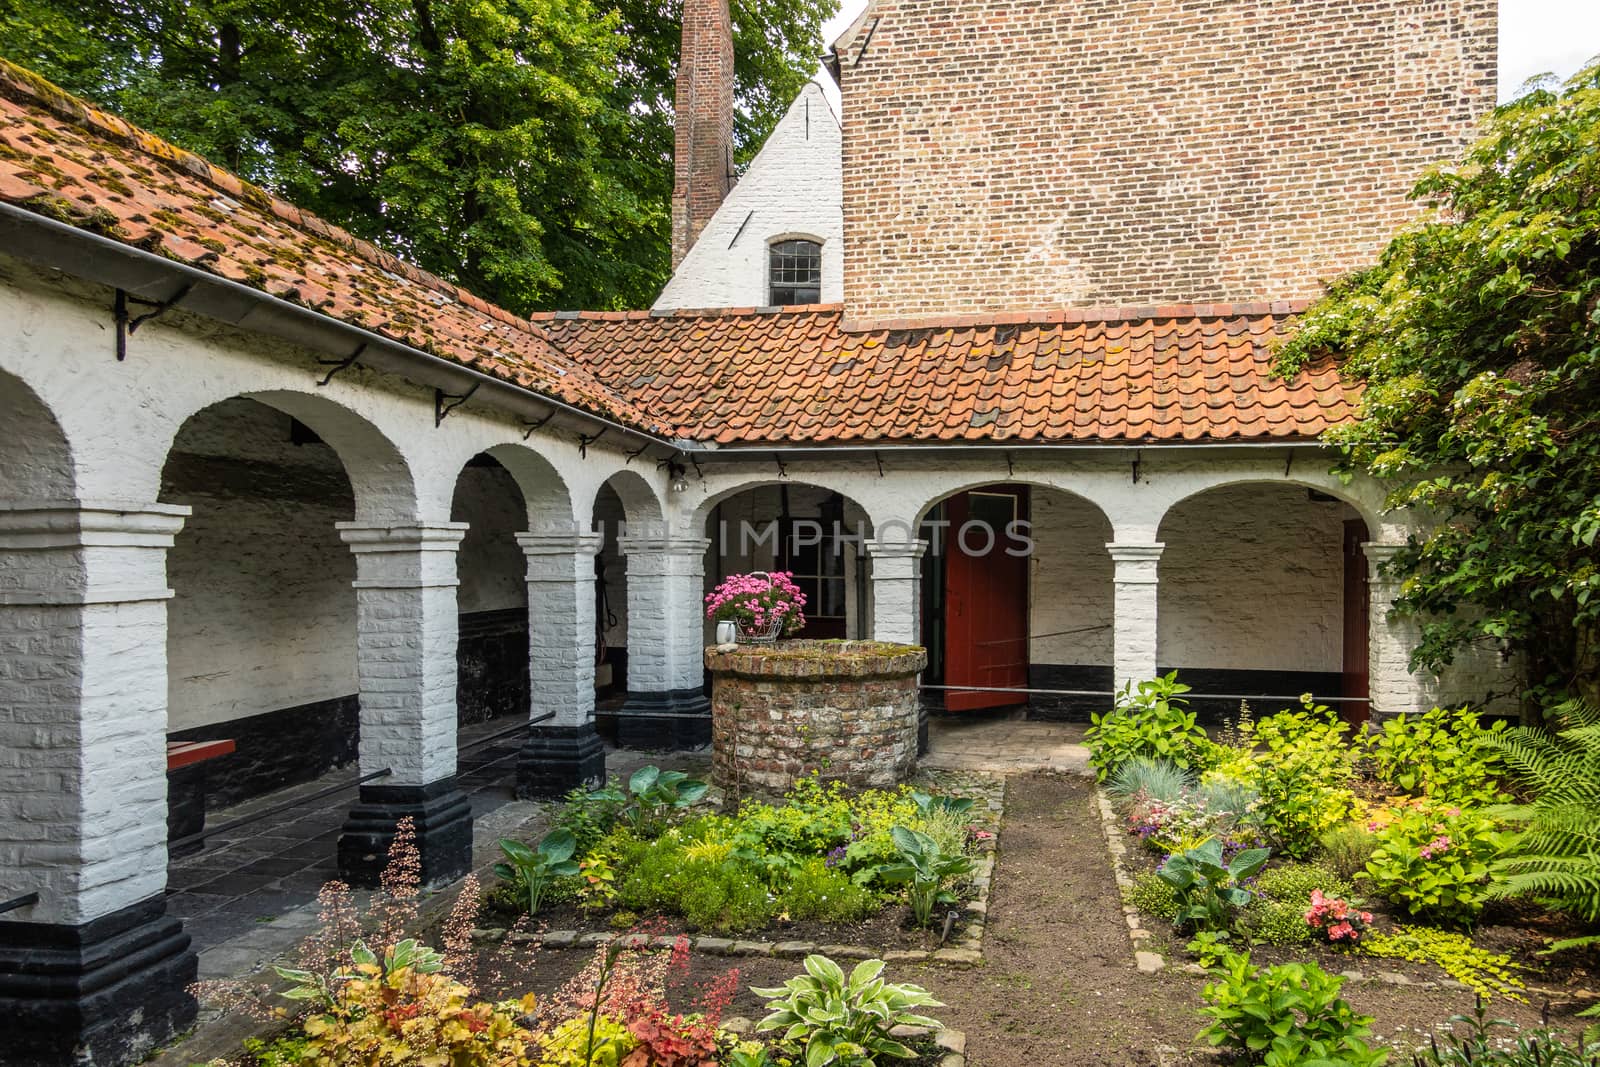 Bruges, Flanders, Belgium -  June 17, 2019: Enclosed herb garden of house in beguinage, Lots of greens, some pinks, white walls and pillars, brick stone structure.